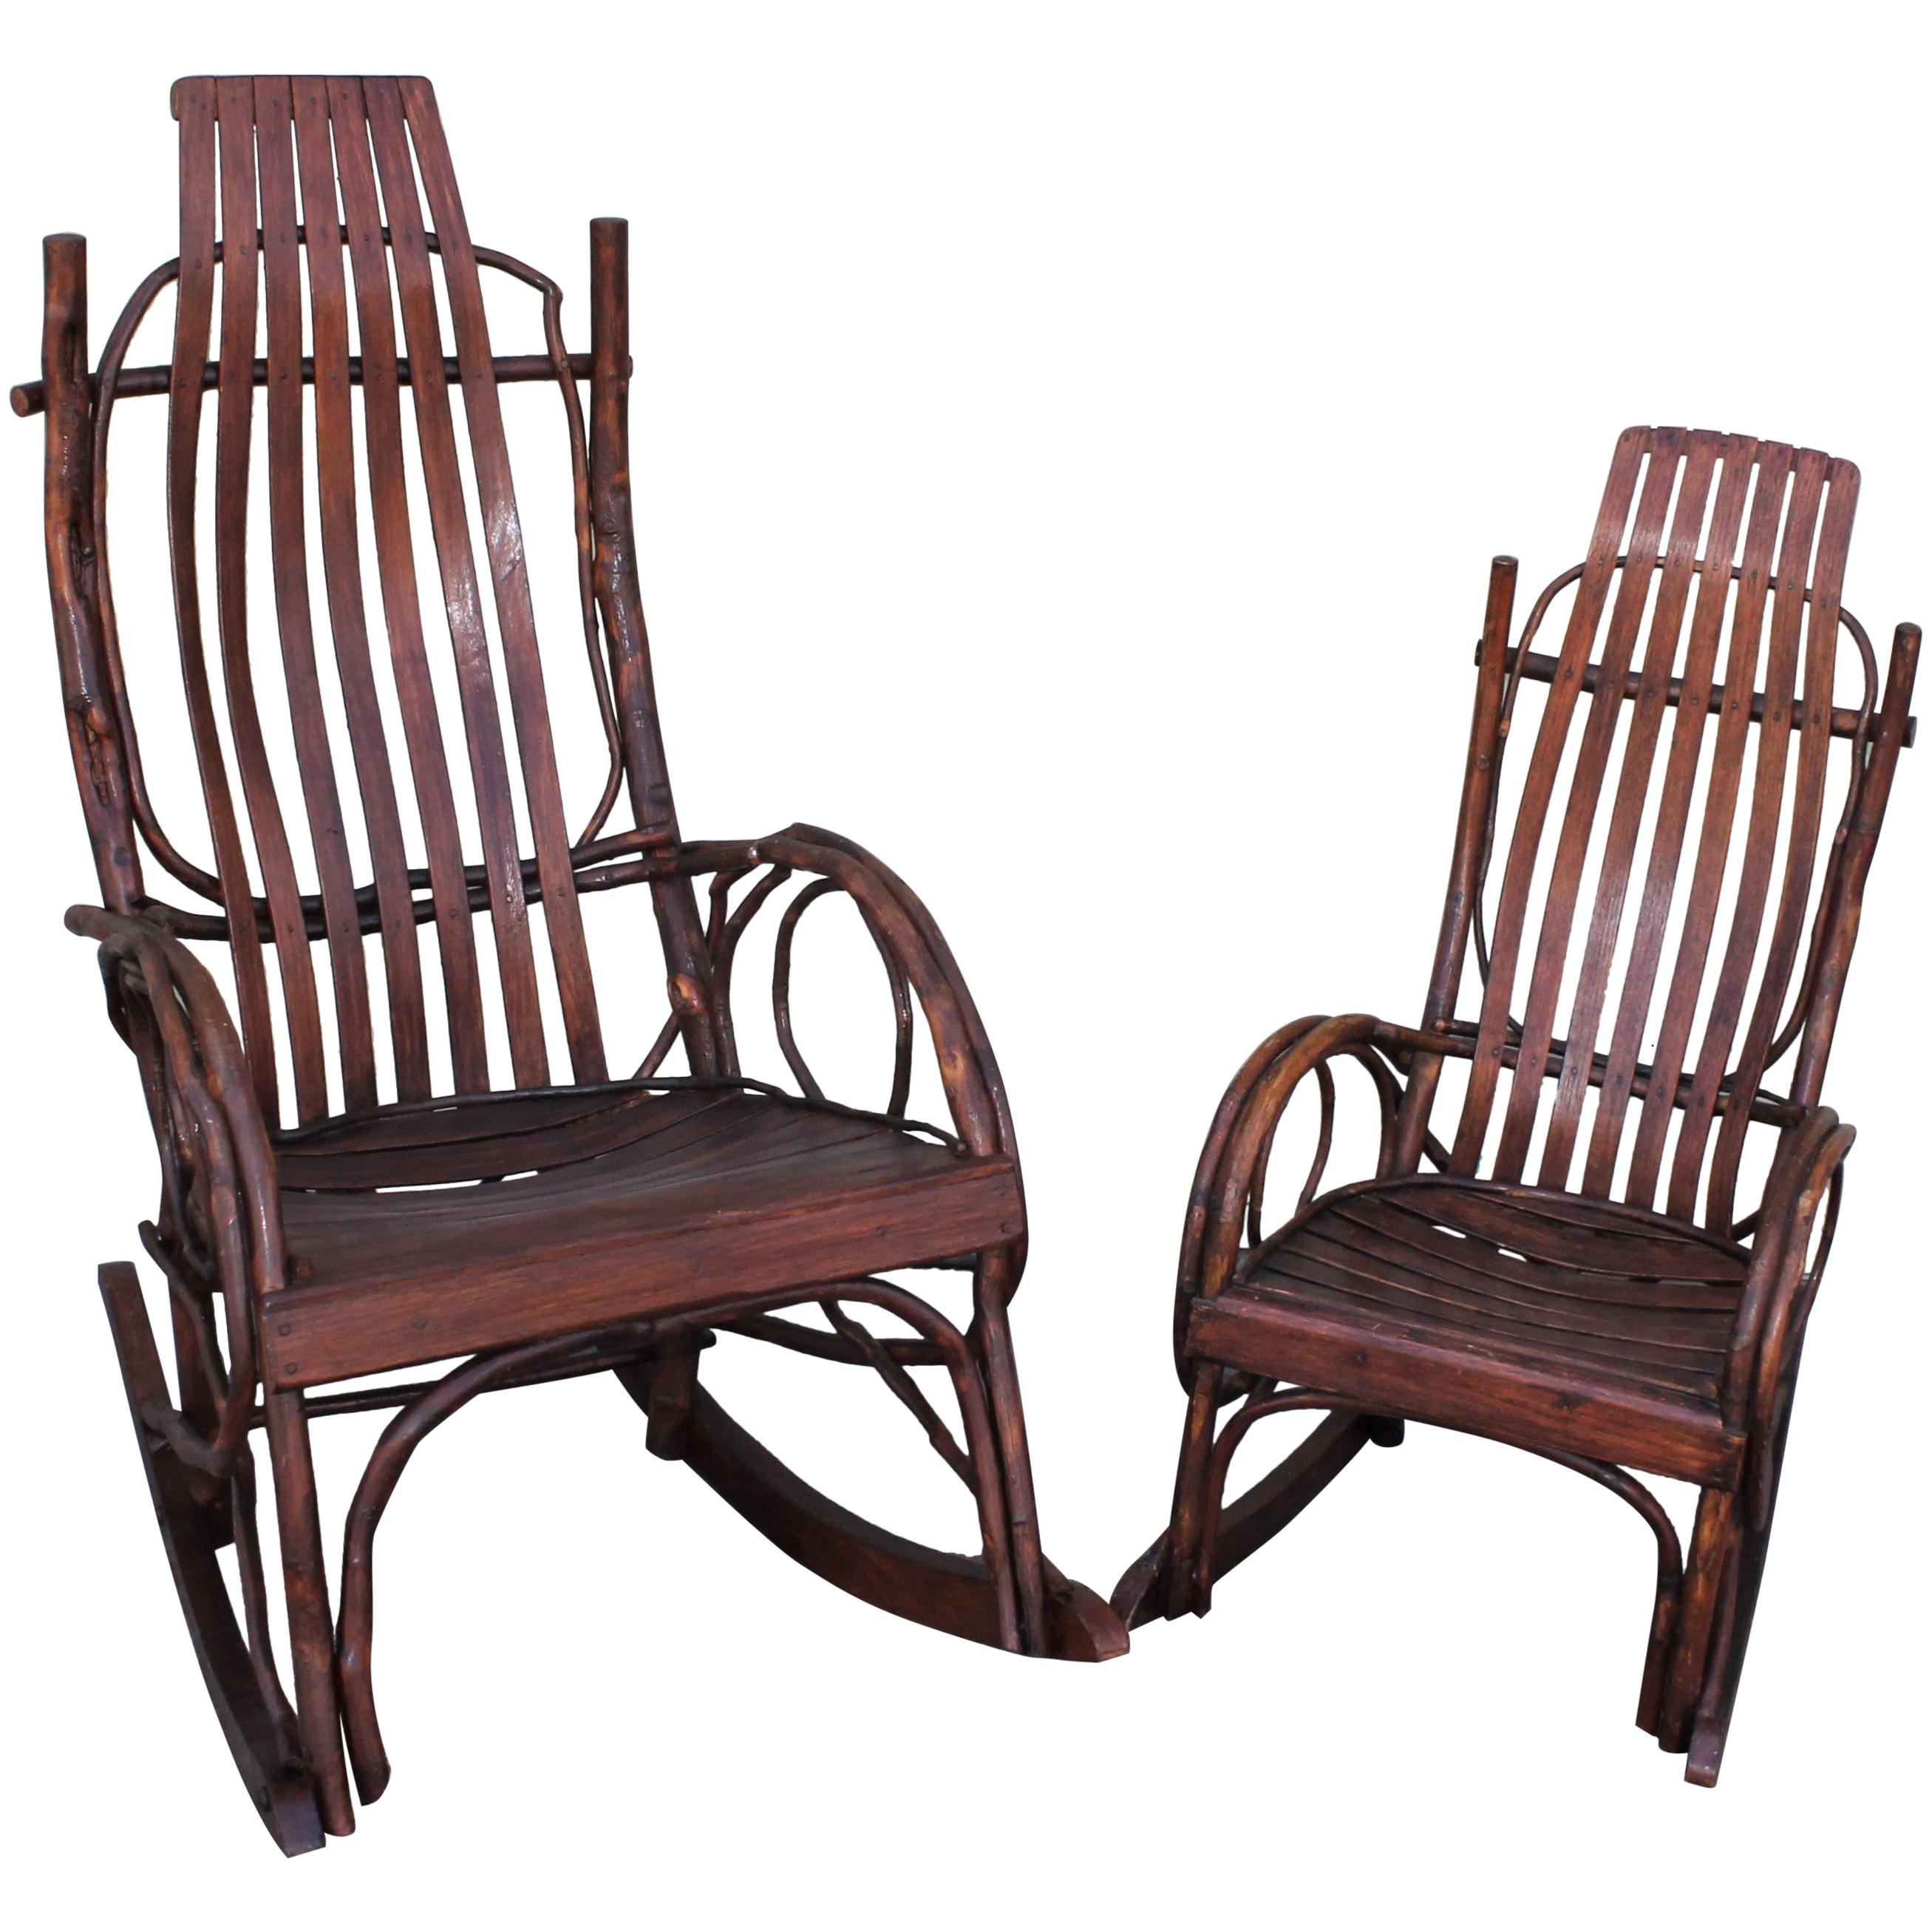 Amish Bent Wood Rocking Chairs, Adults and Child's, 2